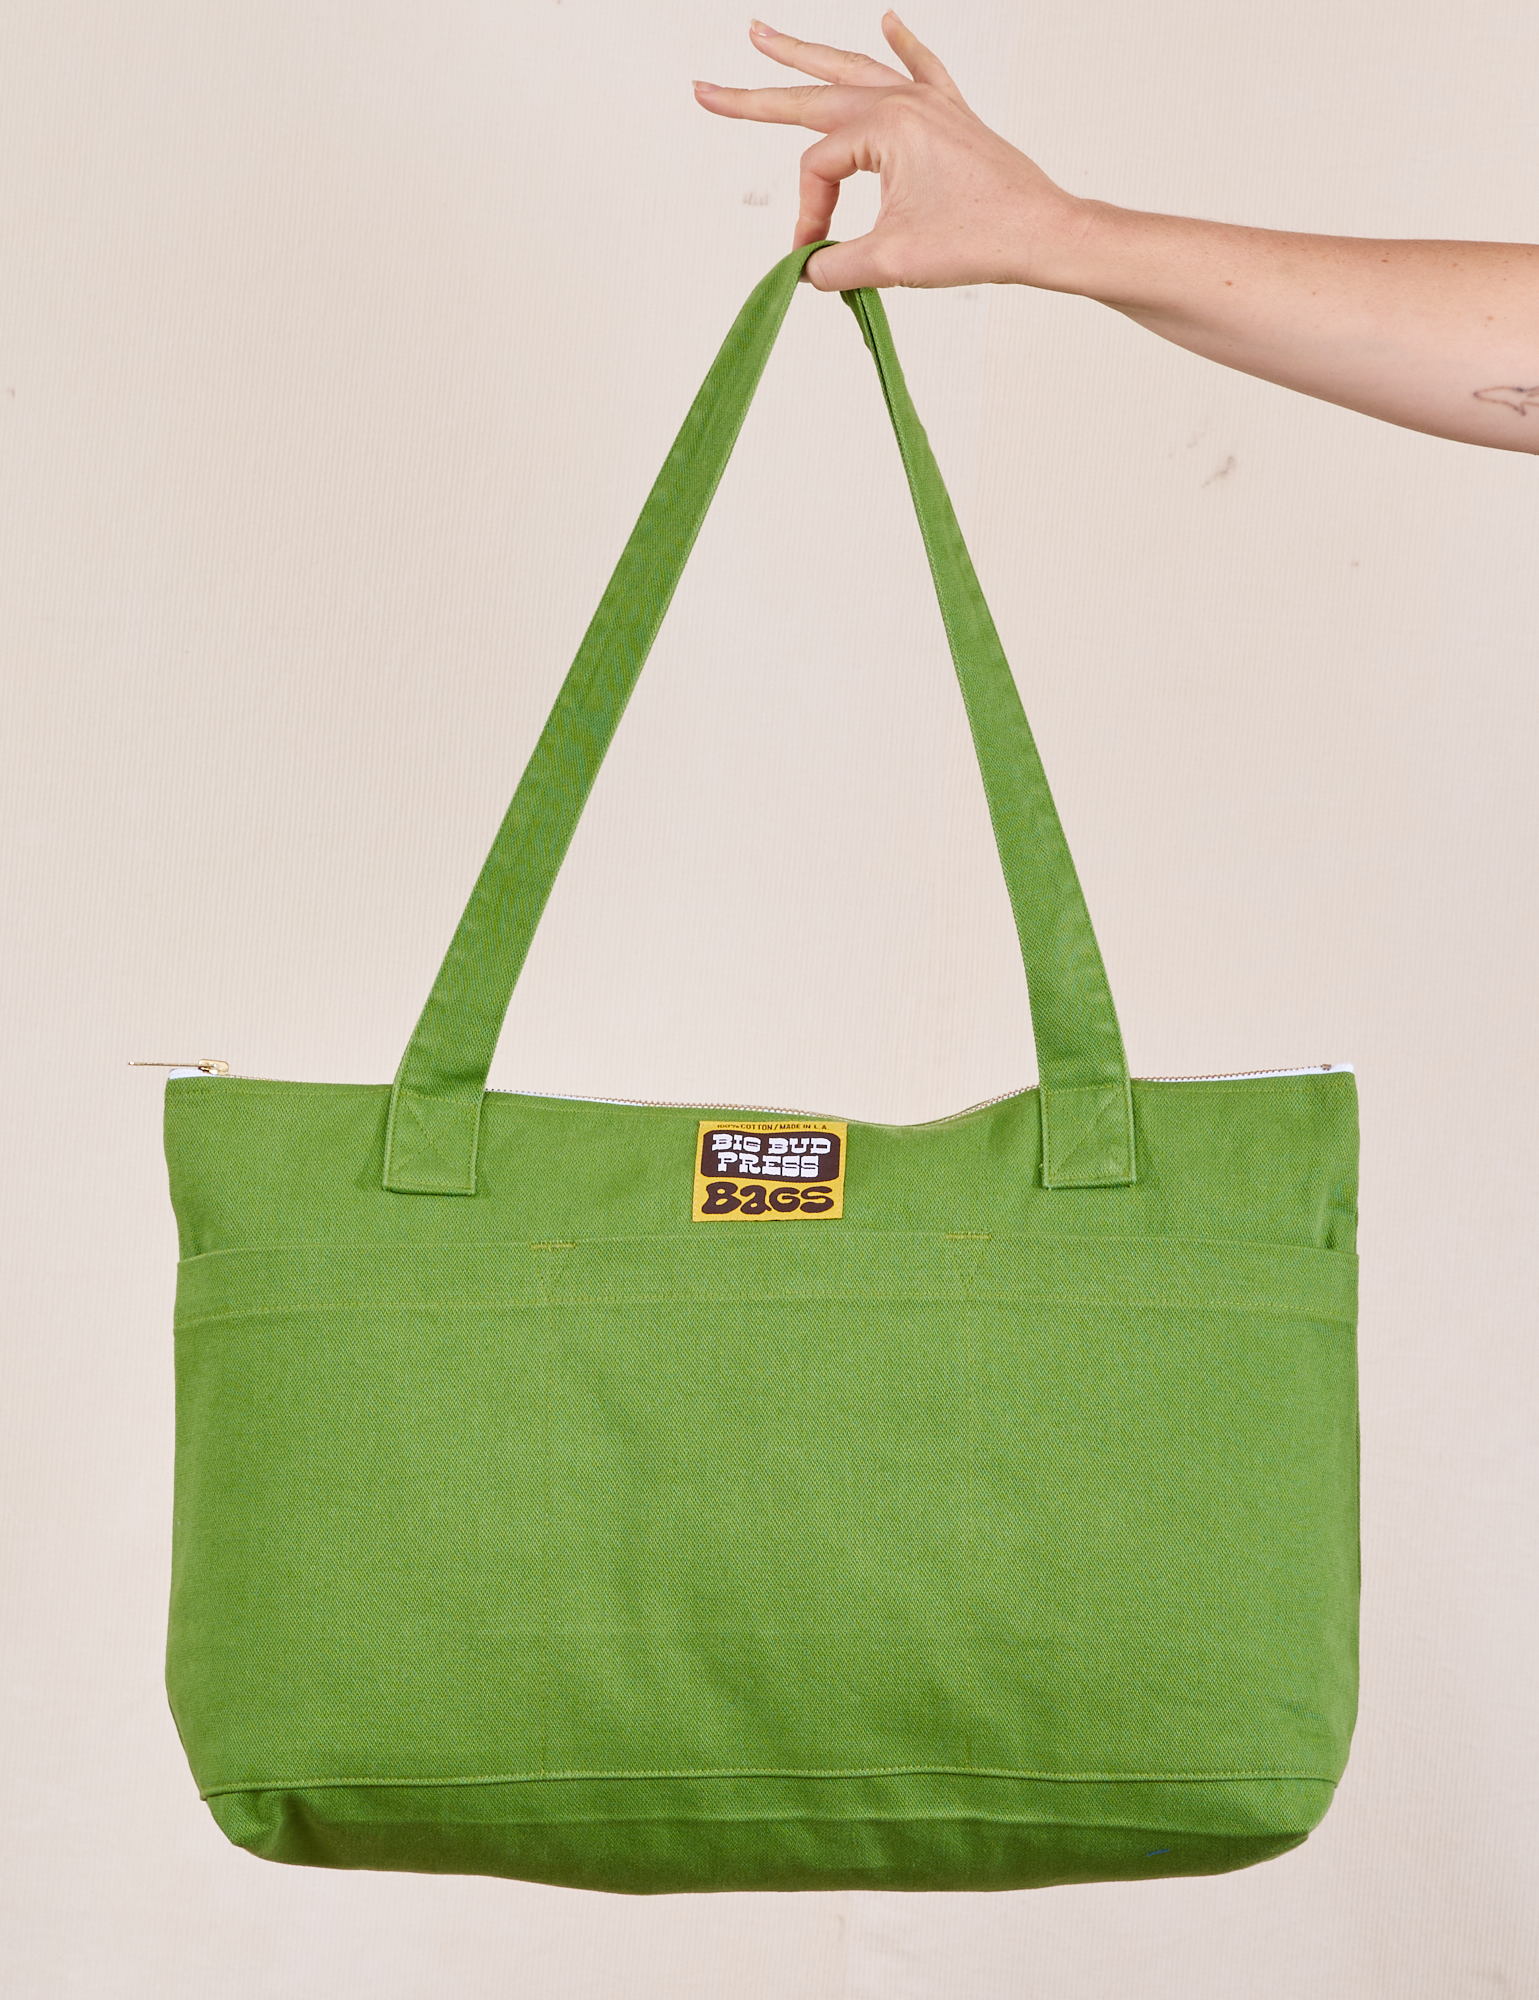 XL Zip Tote in Bright Olive held by model